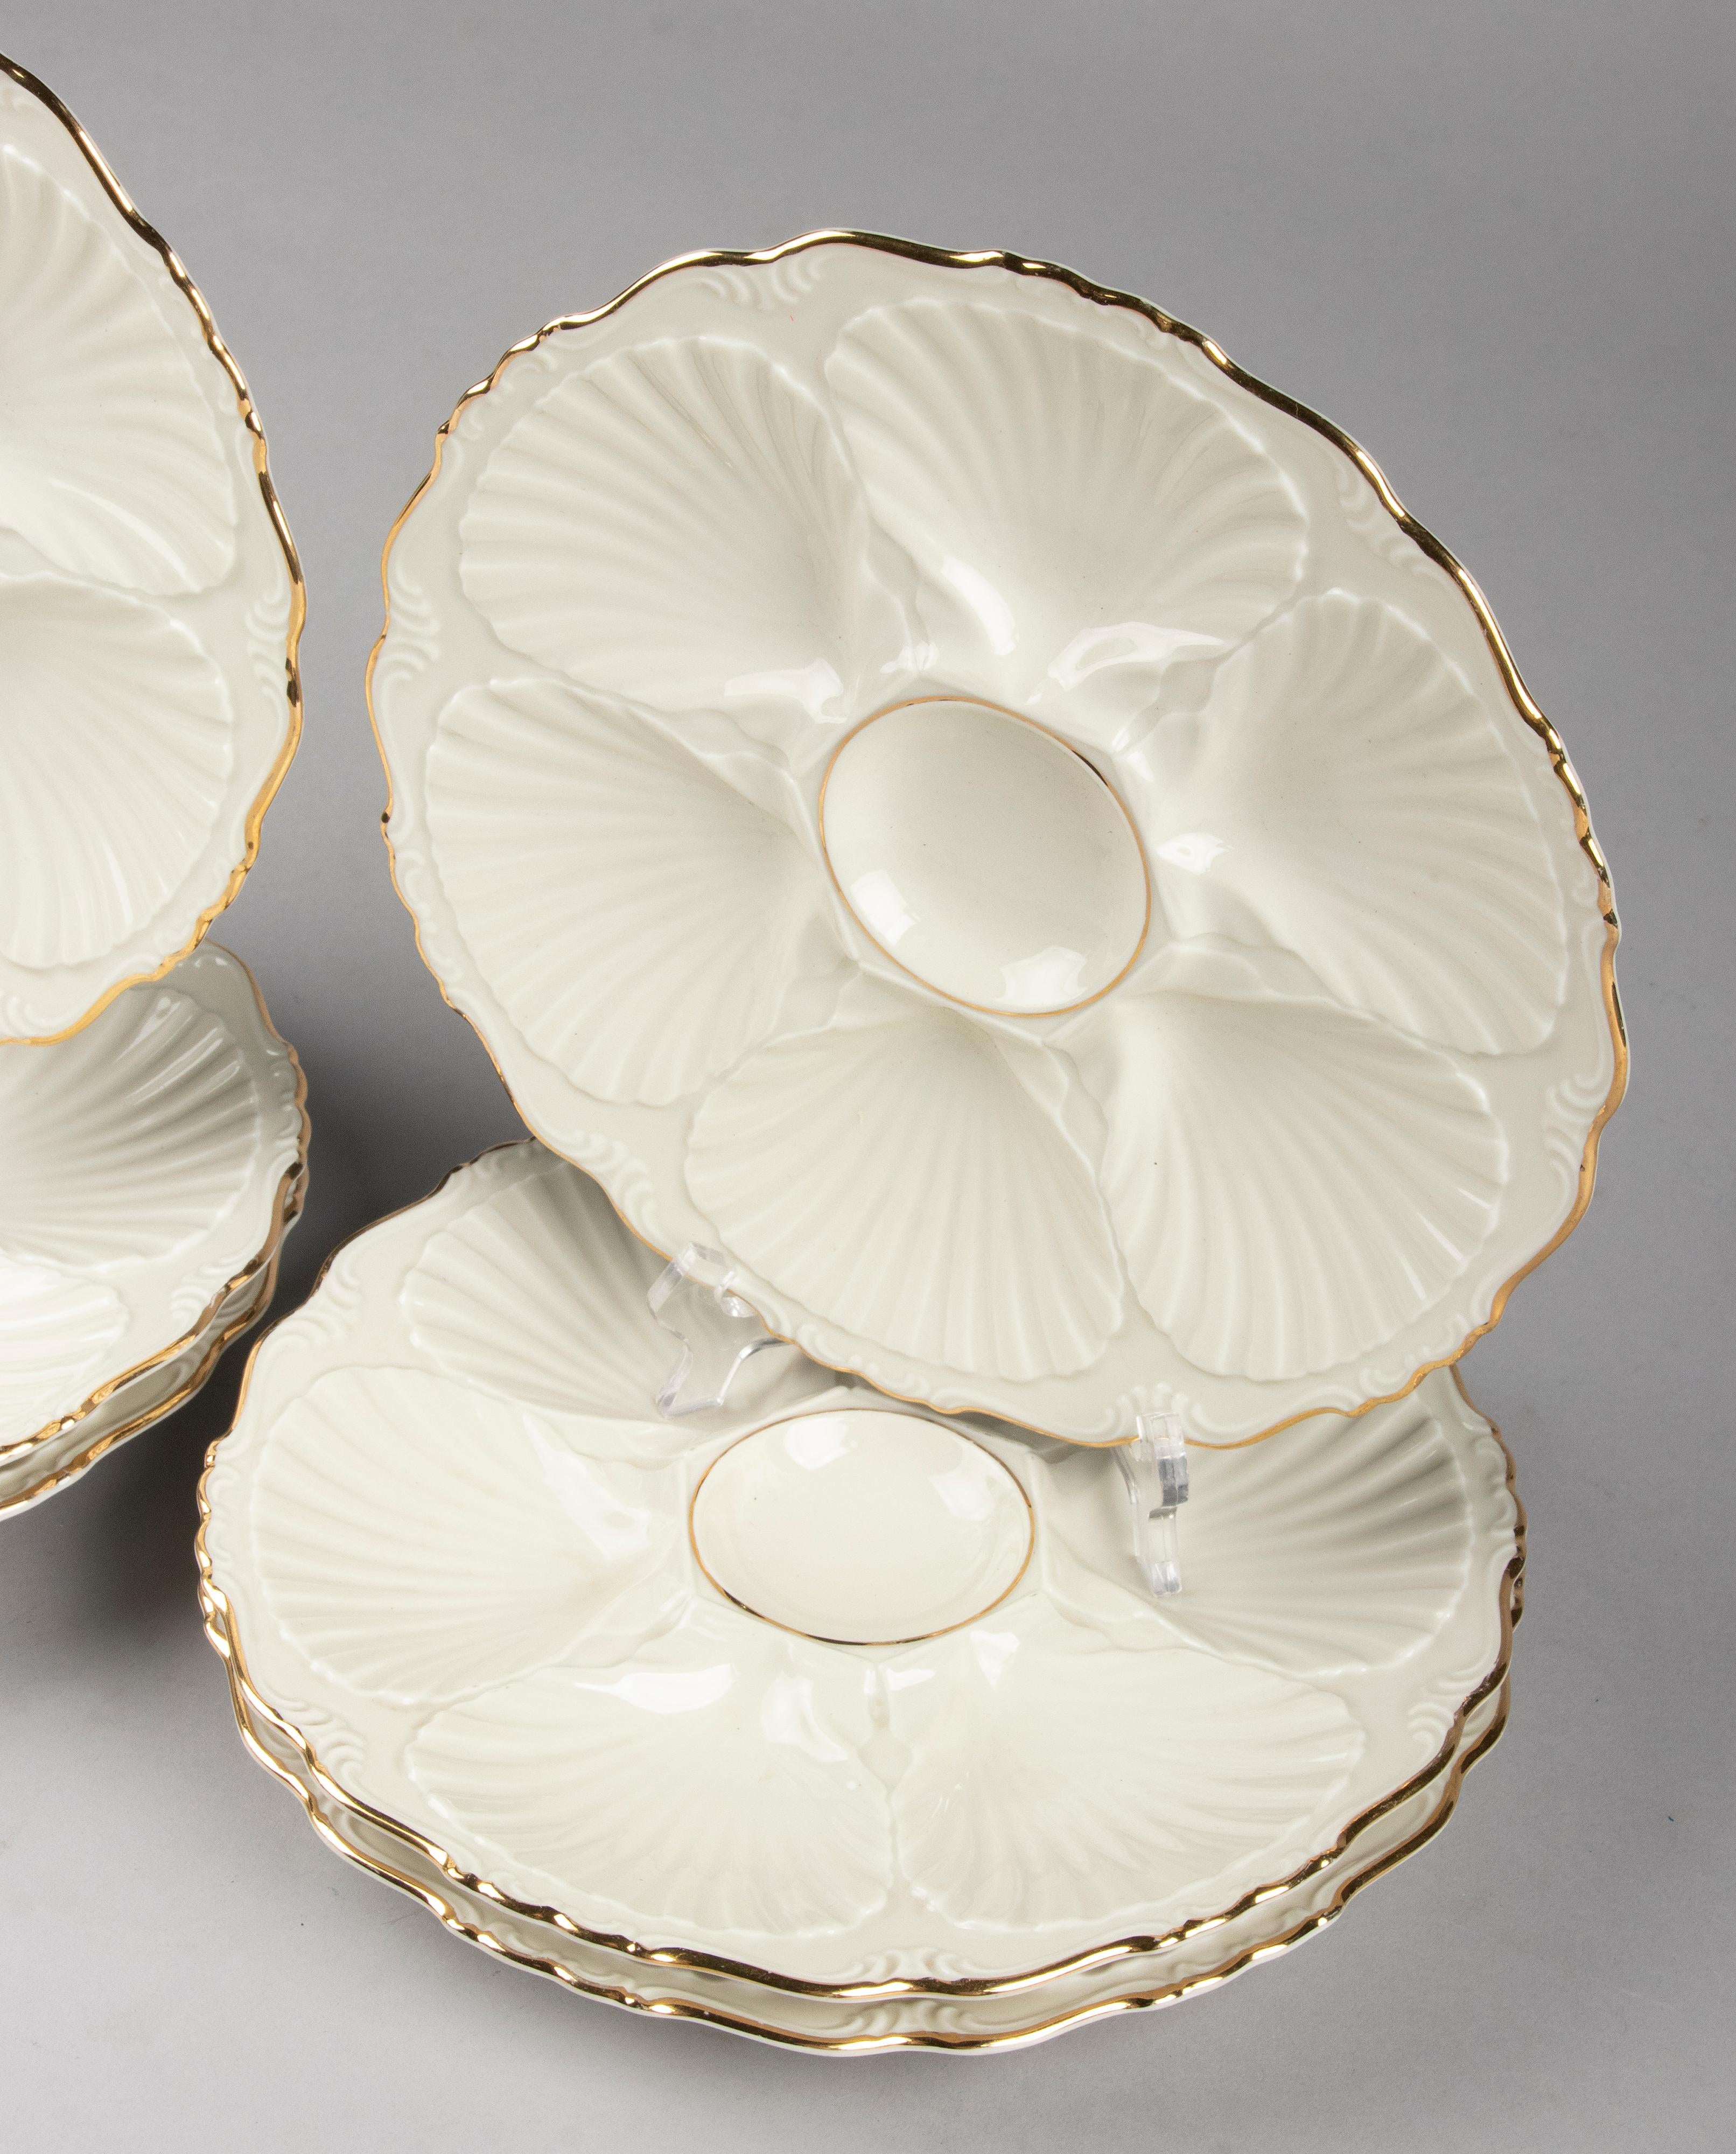 Set of 6 Vintage Porcelain Oyster Plates Made by Edelstein Germany For Sale 3